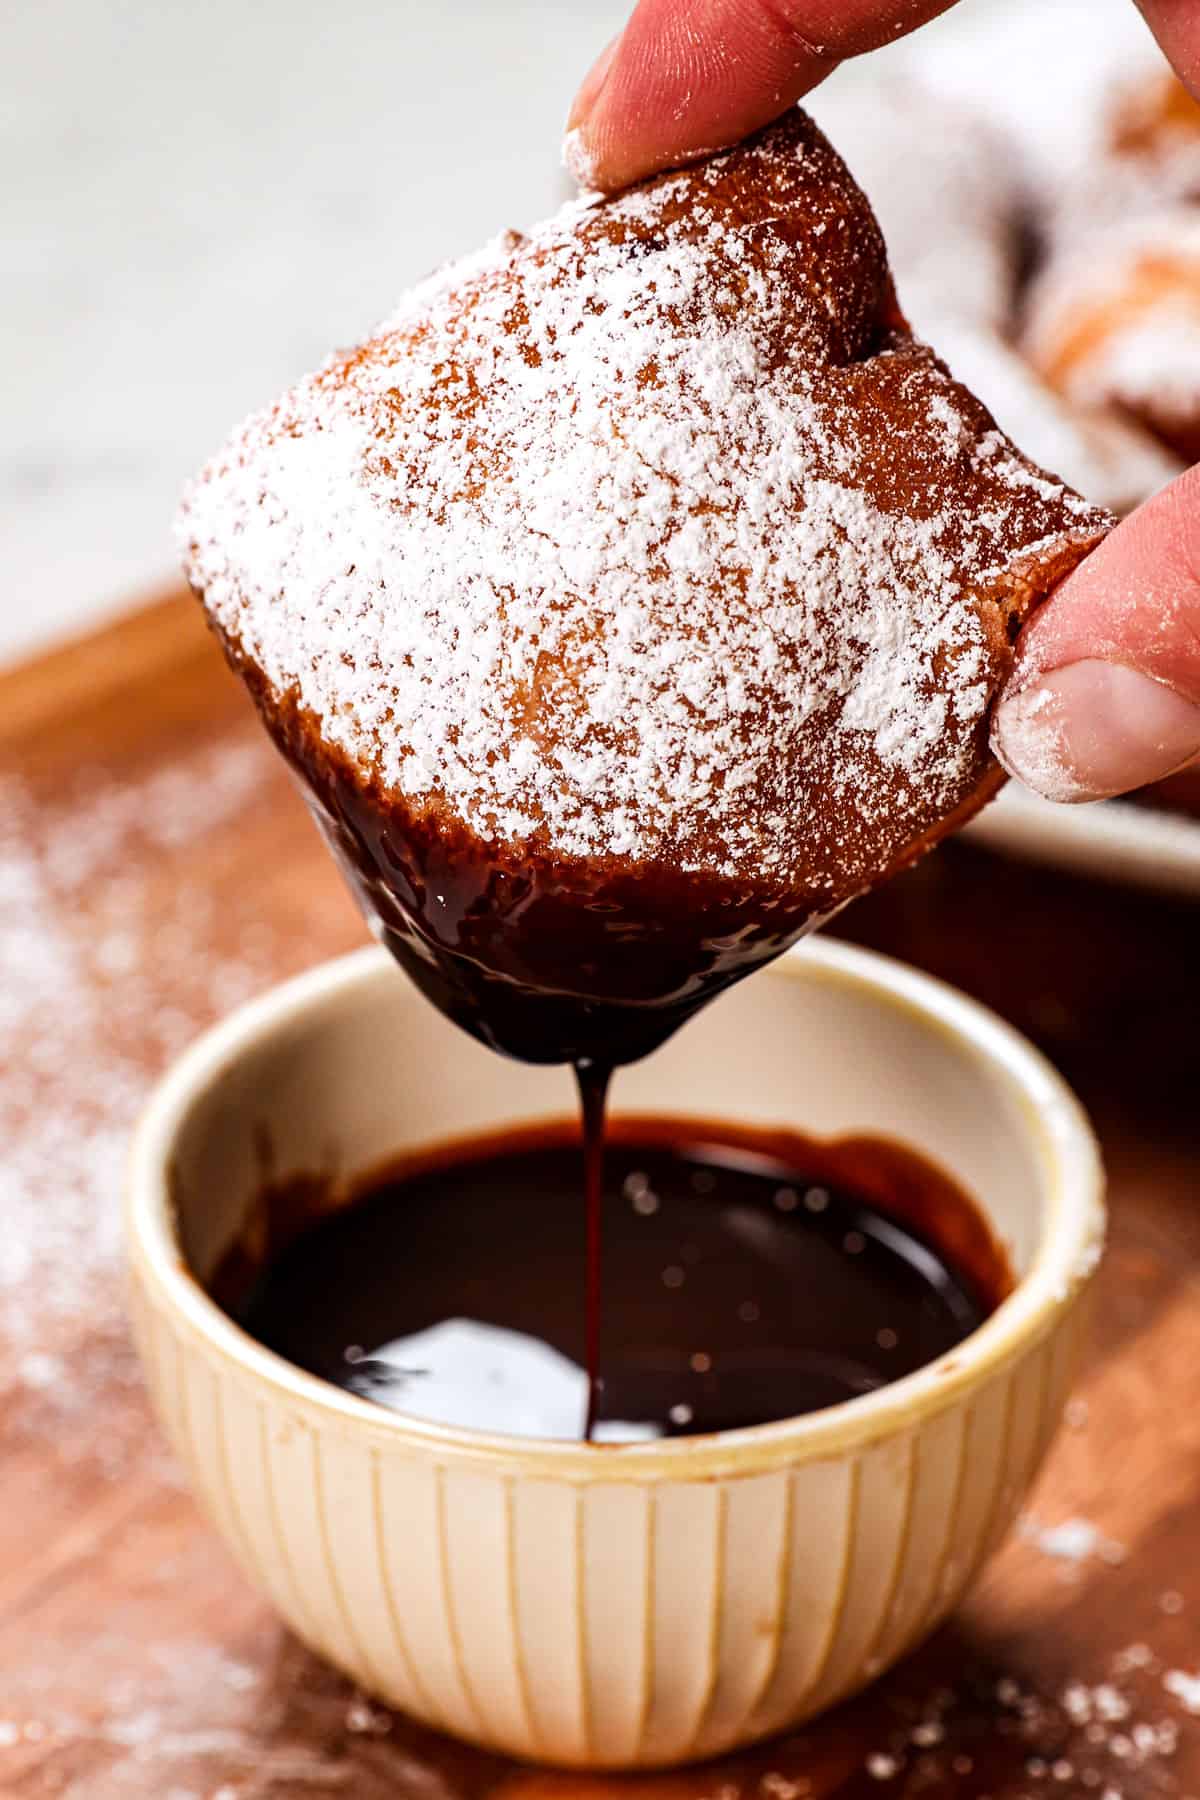 showing how to serve beignets by dipping in chocolate sauce